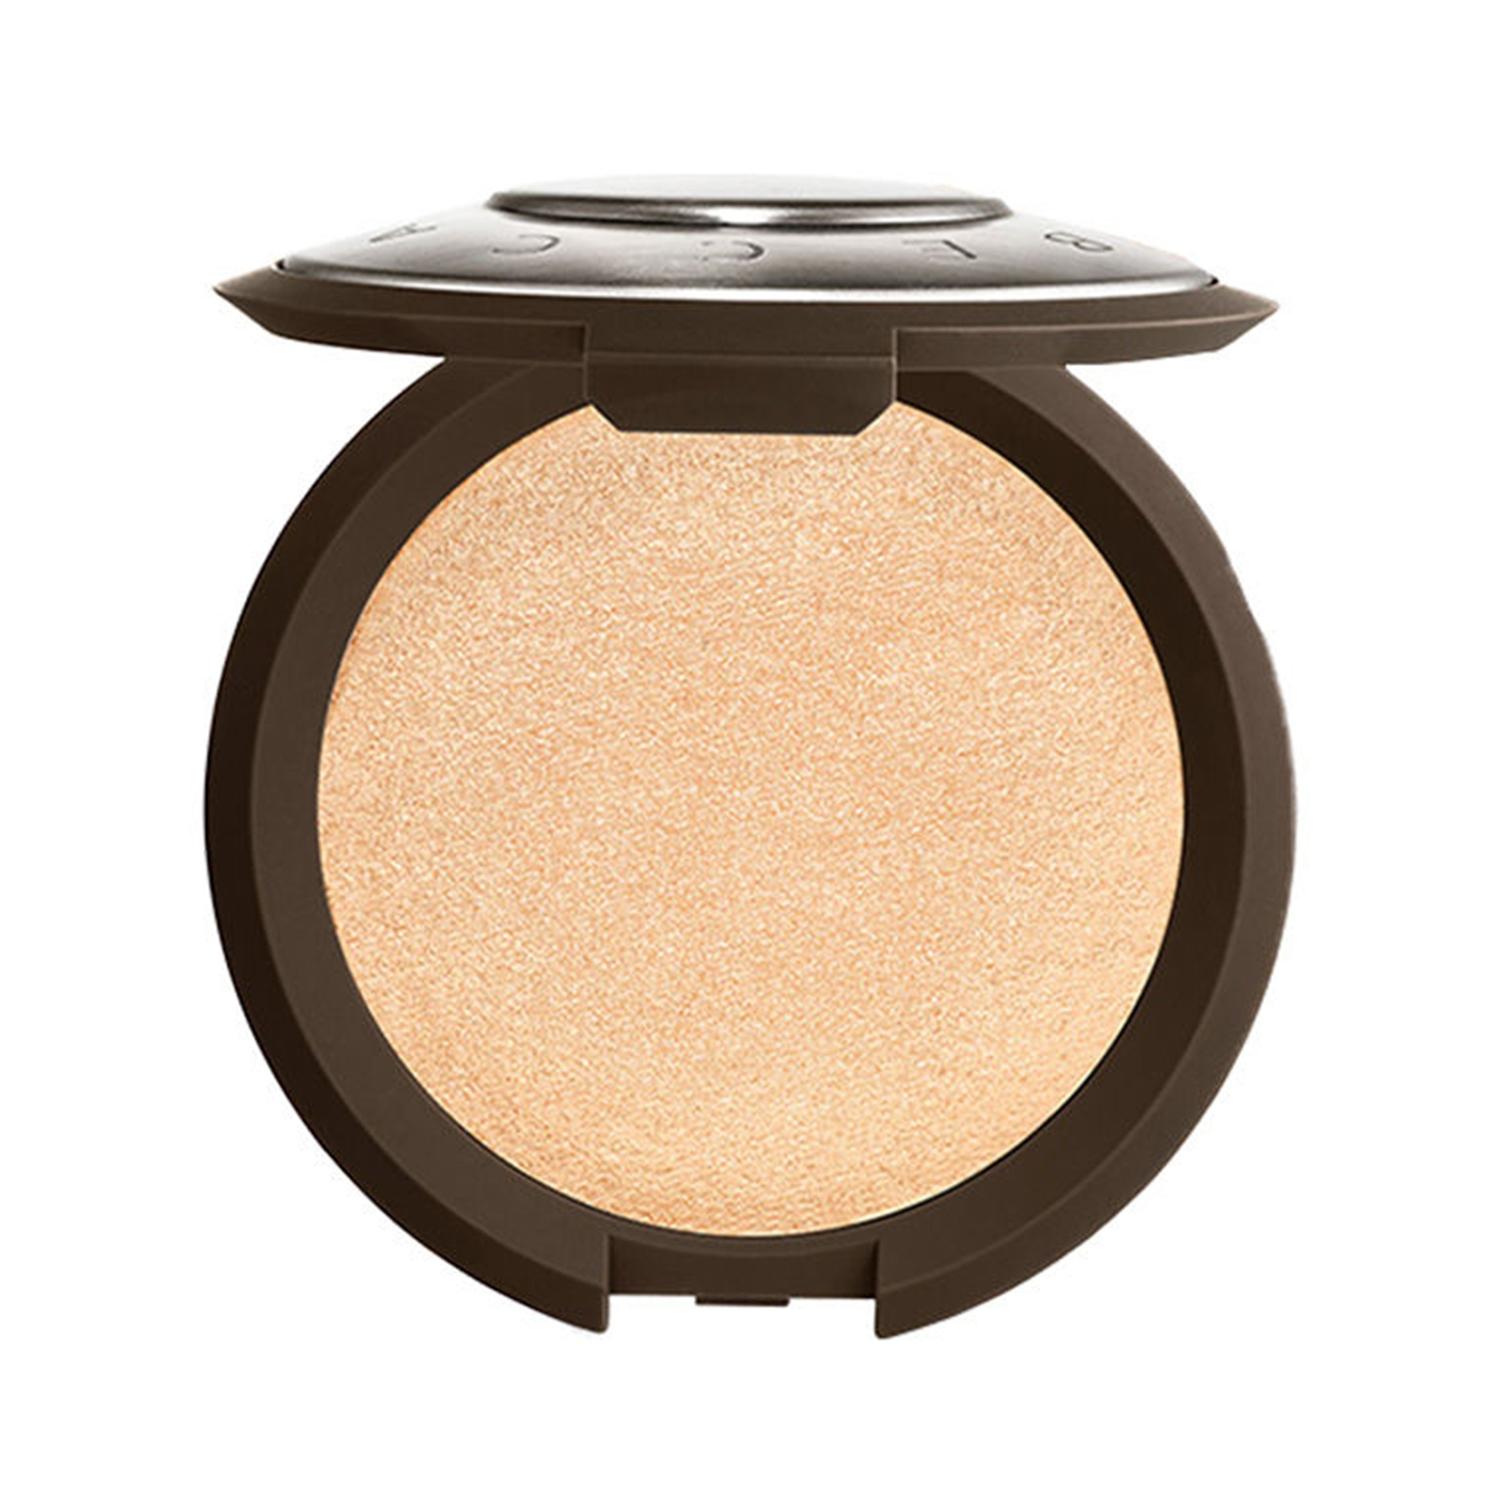 smashbox x becca shimmering skin perfector pressed - cpop (7g)